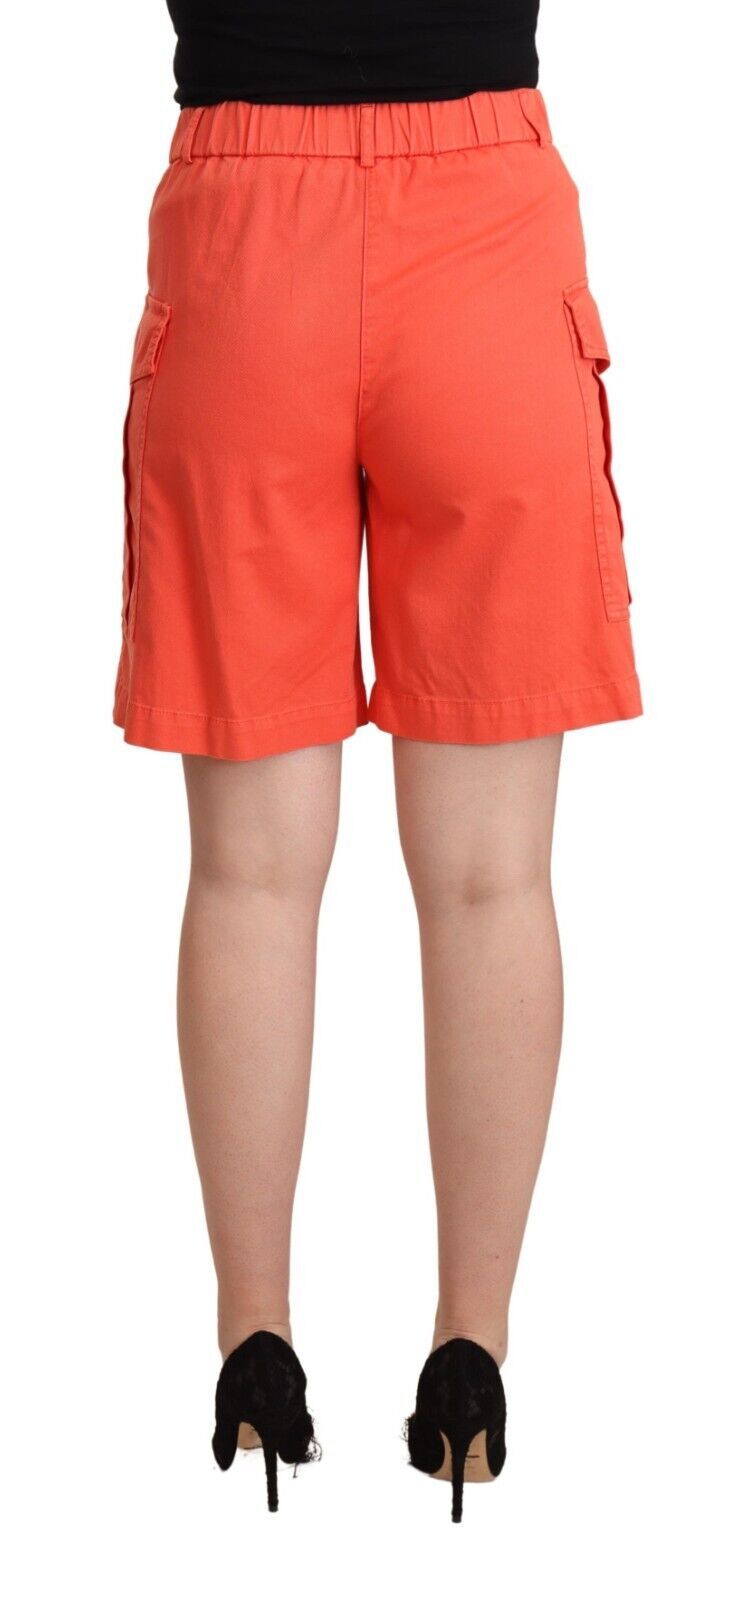 Chic High-Waisted Cargo Shorts in Vibrant Orange